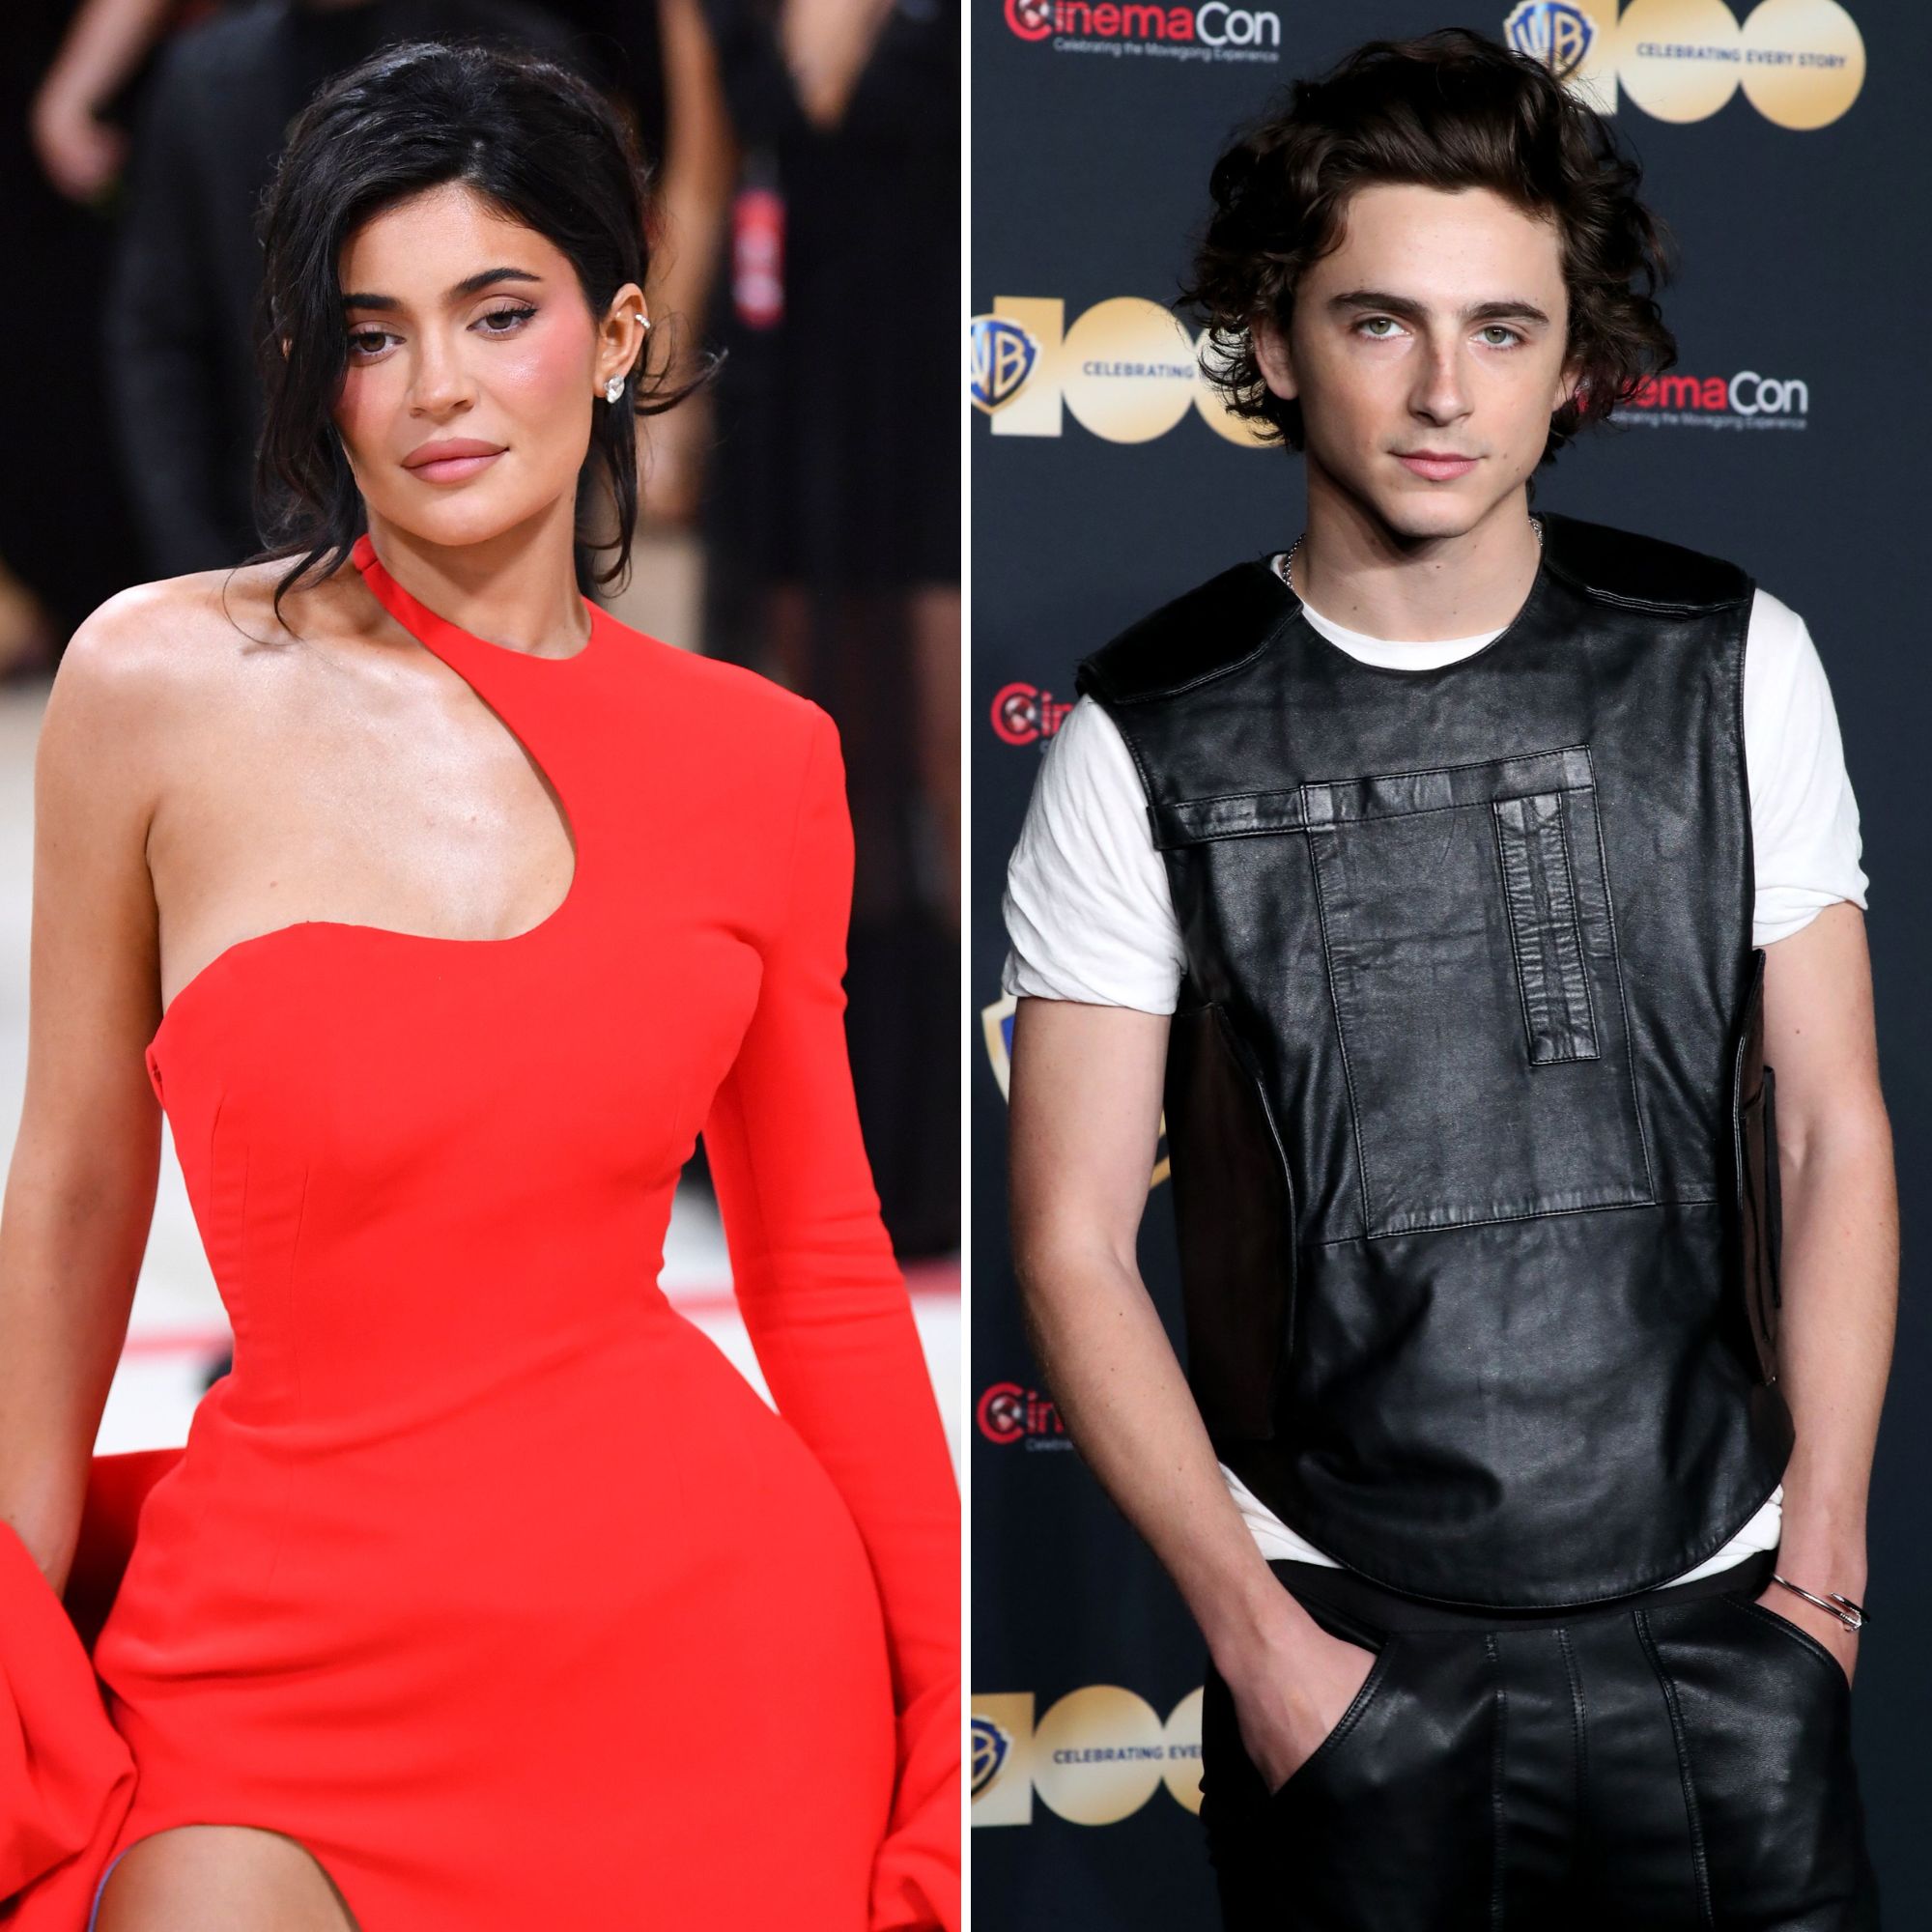 Are Kylie Jenner and Timothee Chalamet Really Dating? Details